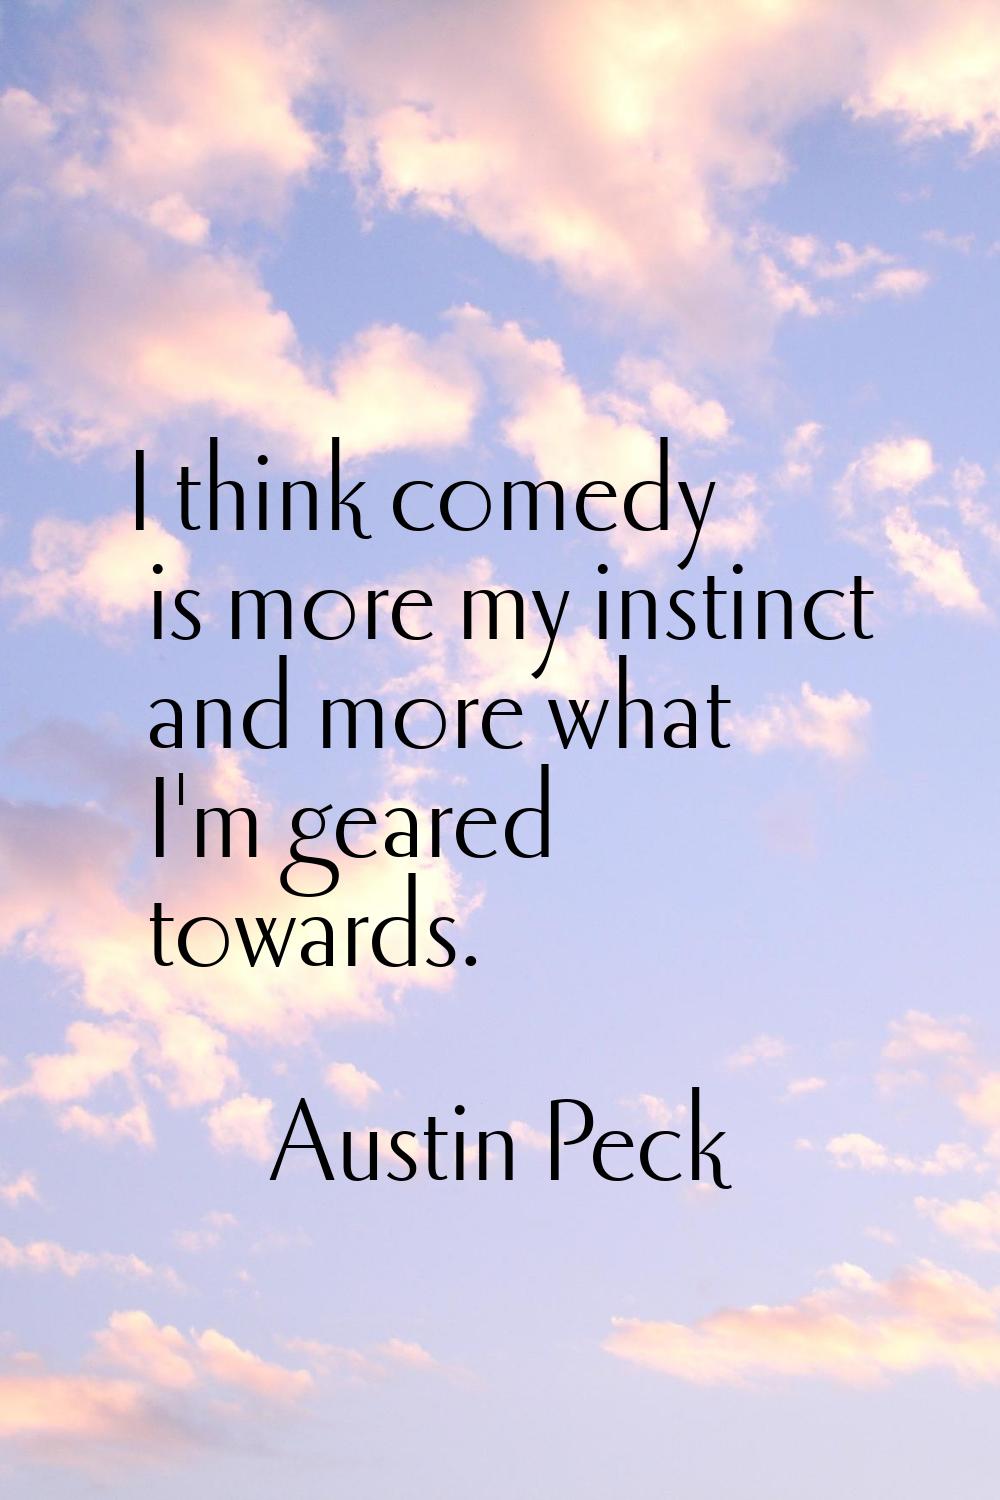 I think comedy is more my instinct and more what I'm geared towards.